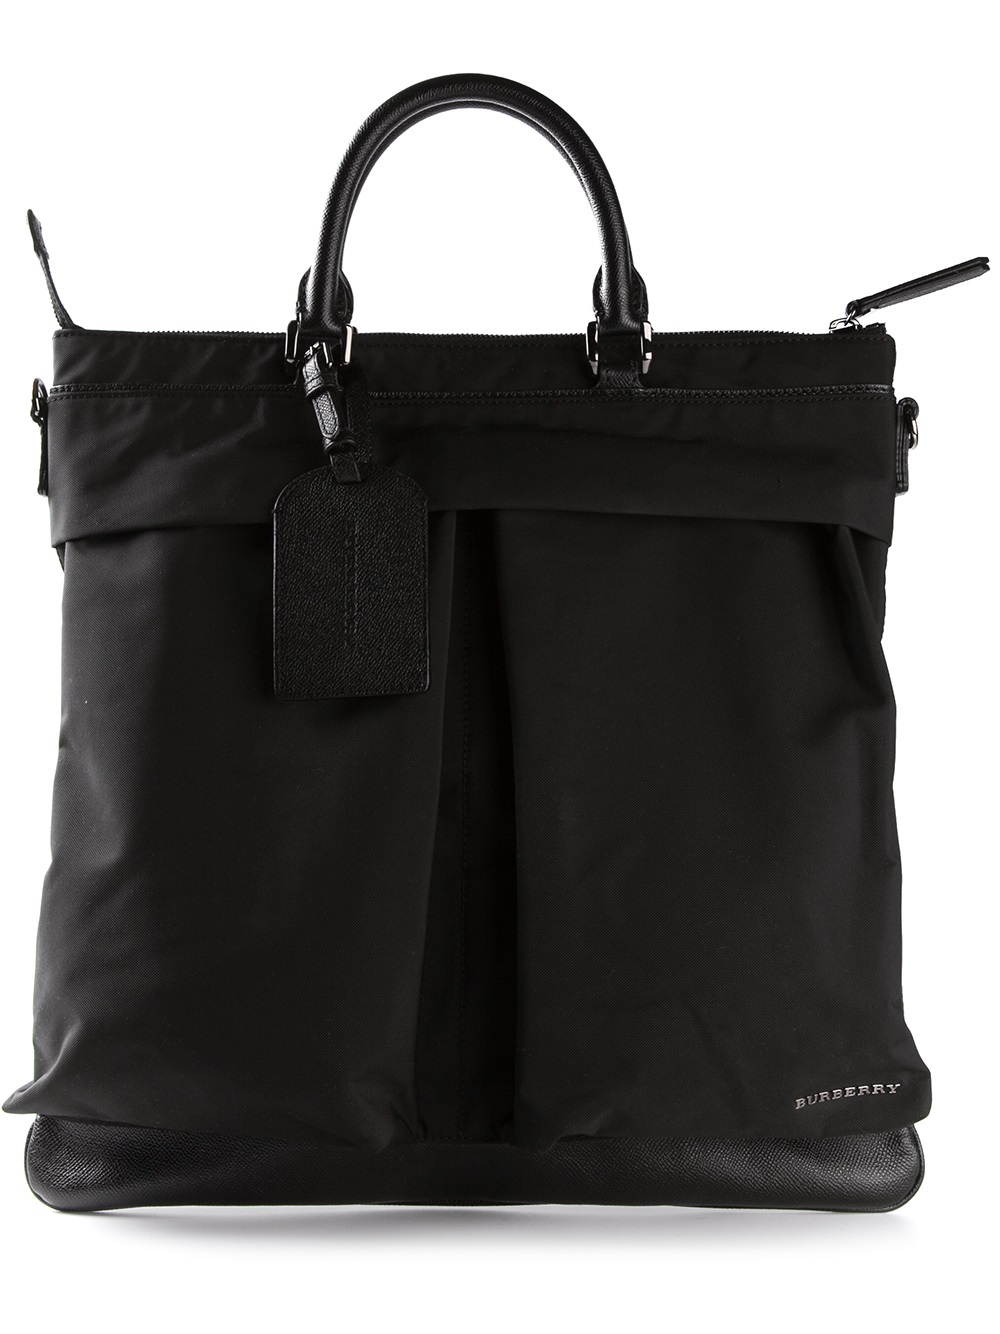 Lyst - Burberry Leather Trim Tote Bag in Black for Men